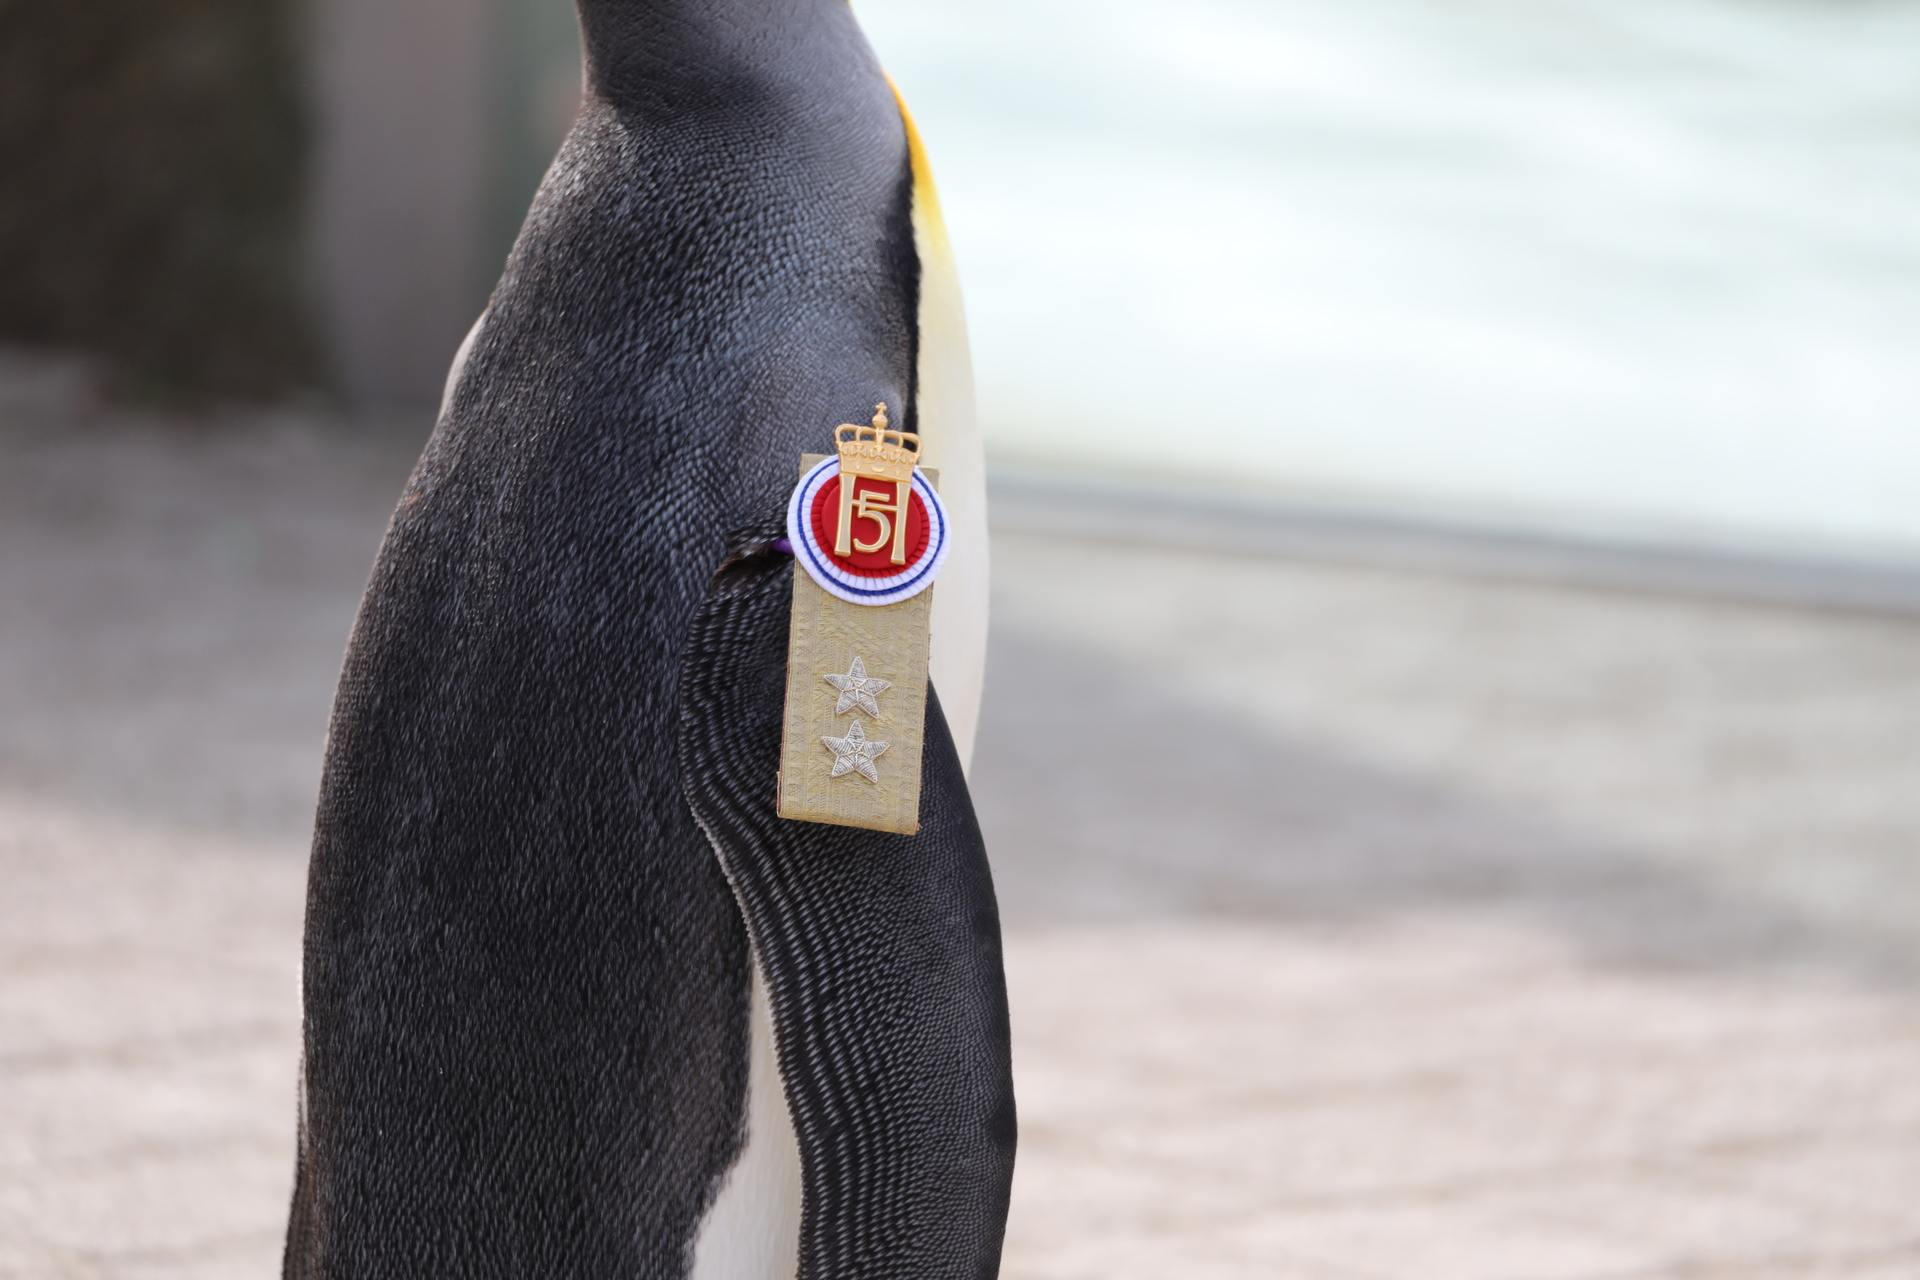 Following a carefully choreographed parade, Sir Nils was awarded his new badge of honour.